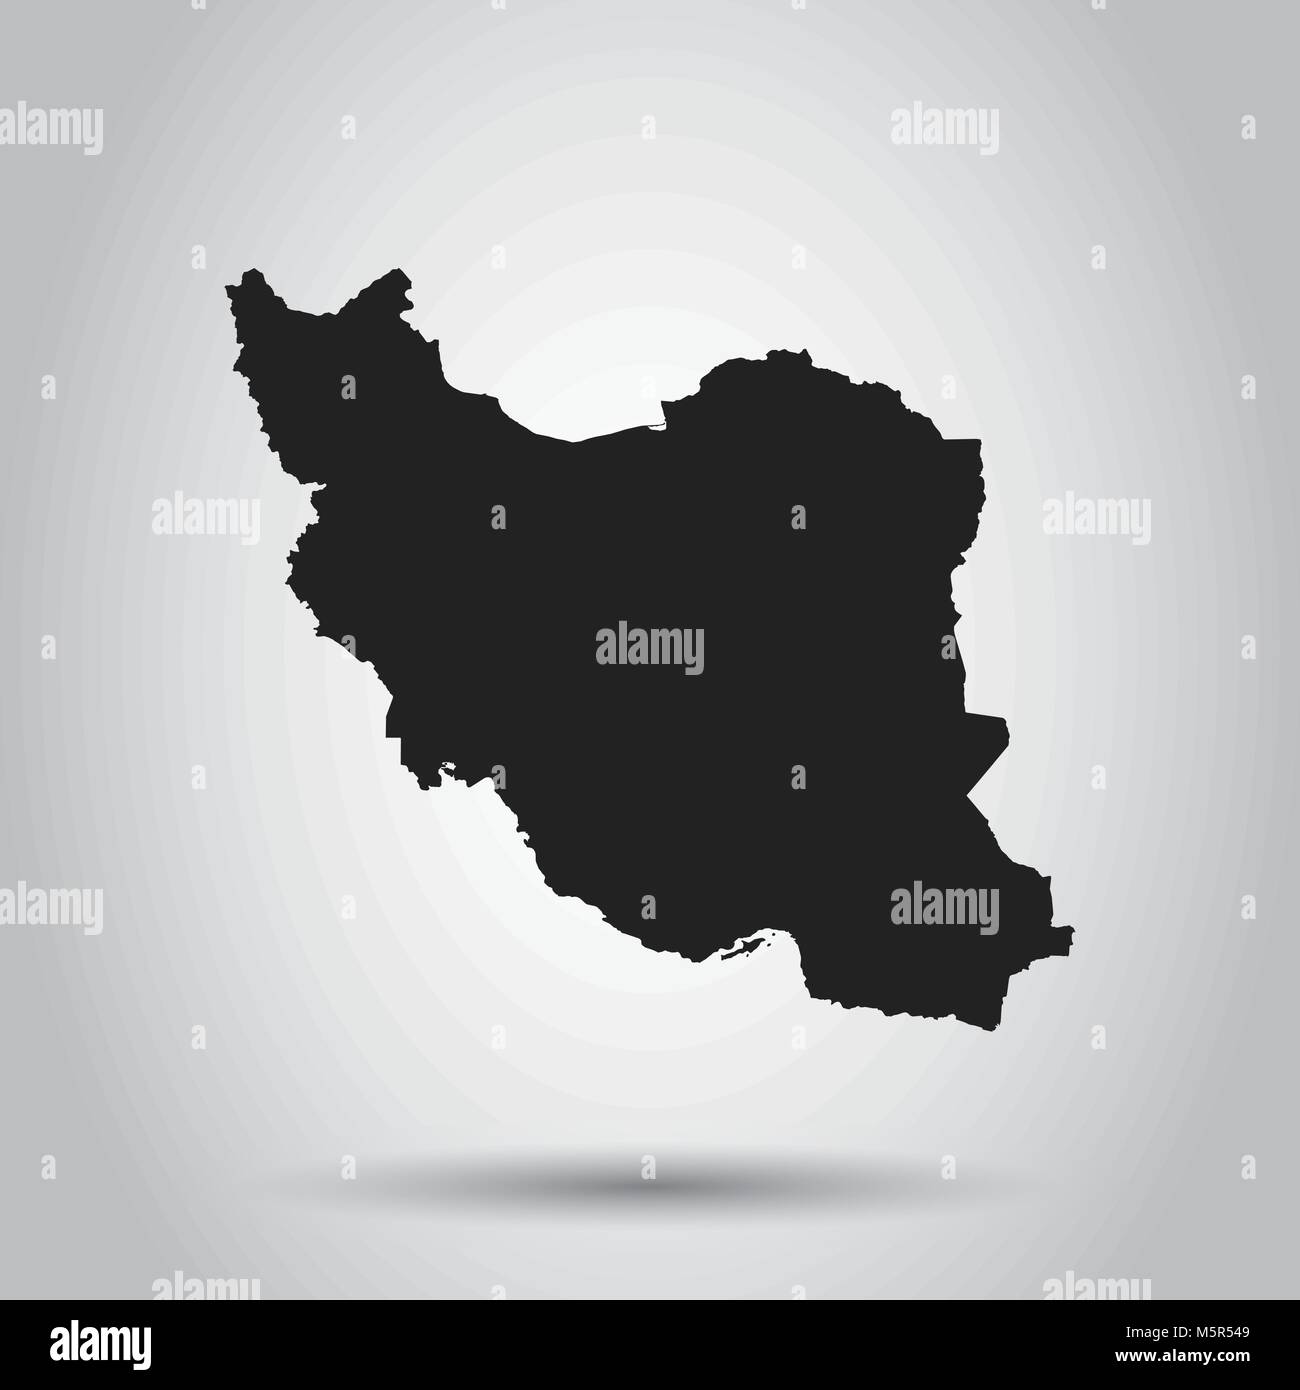 Iran vector map. Black icon on white background. Stock Vector